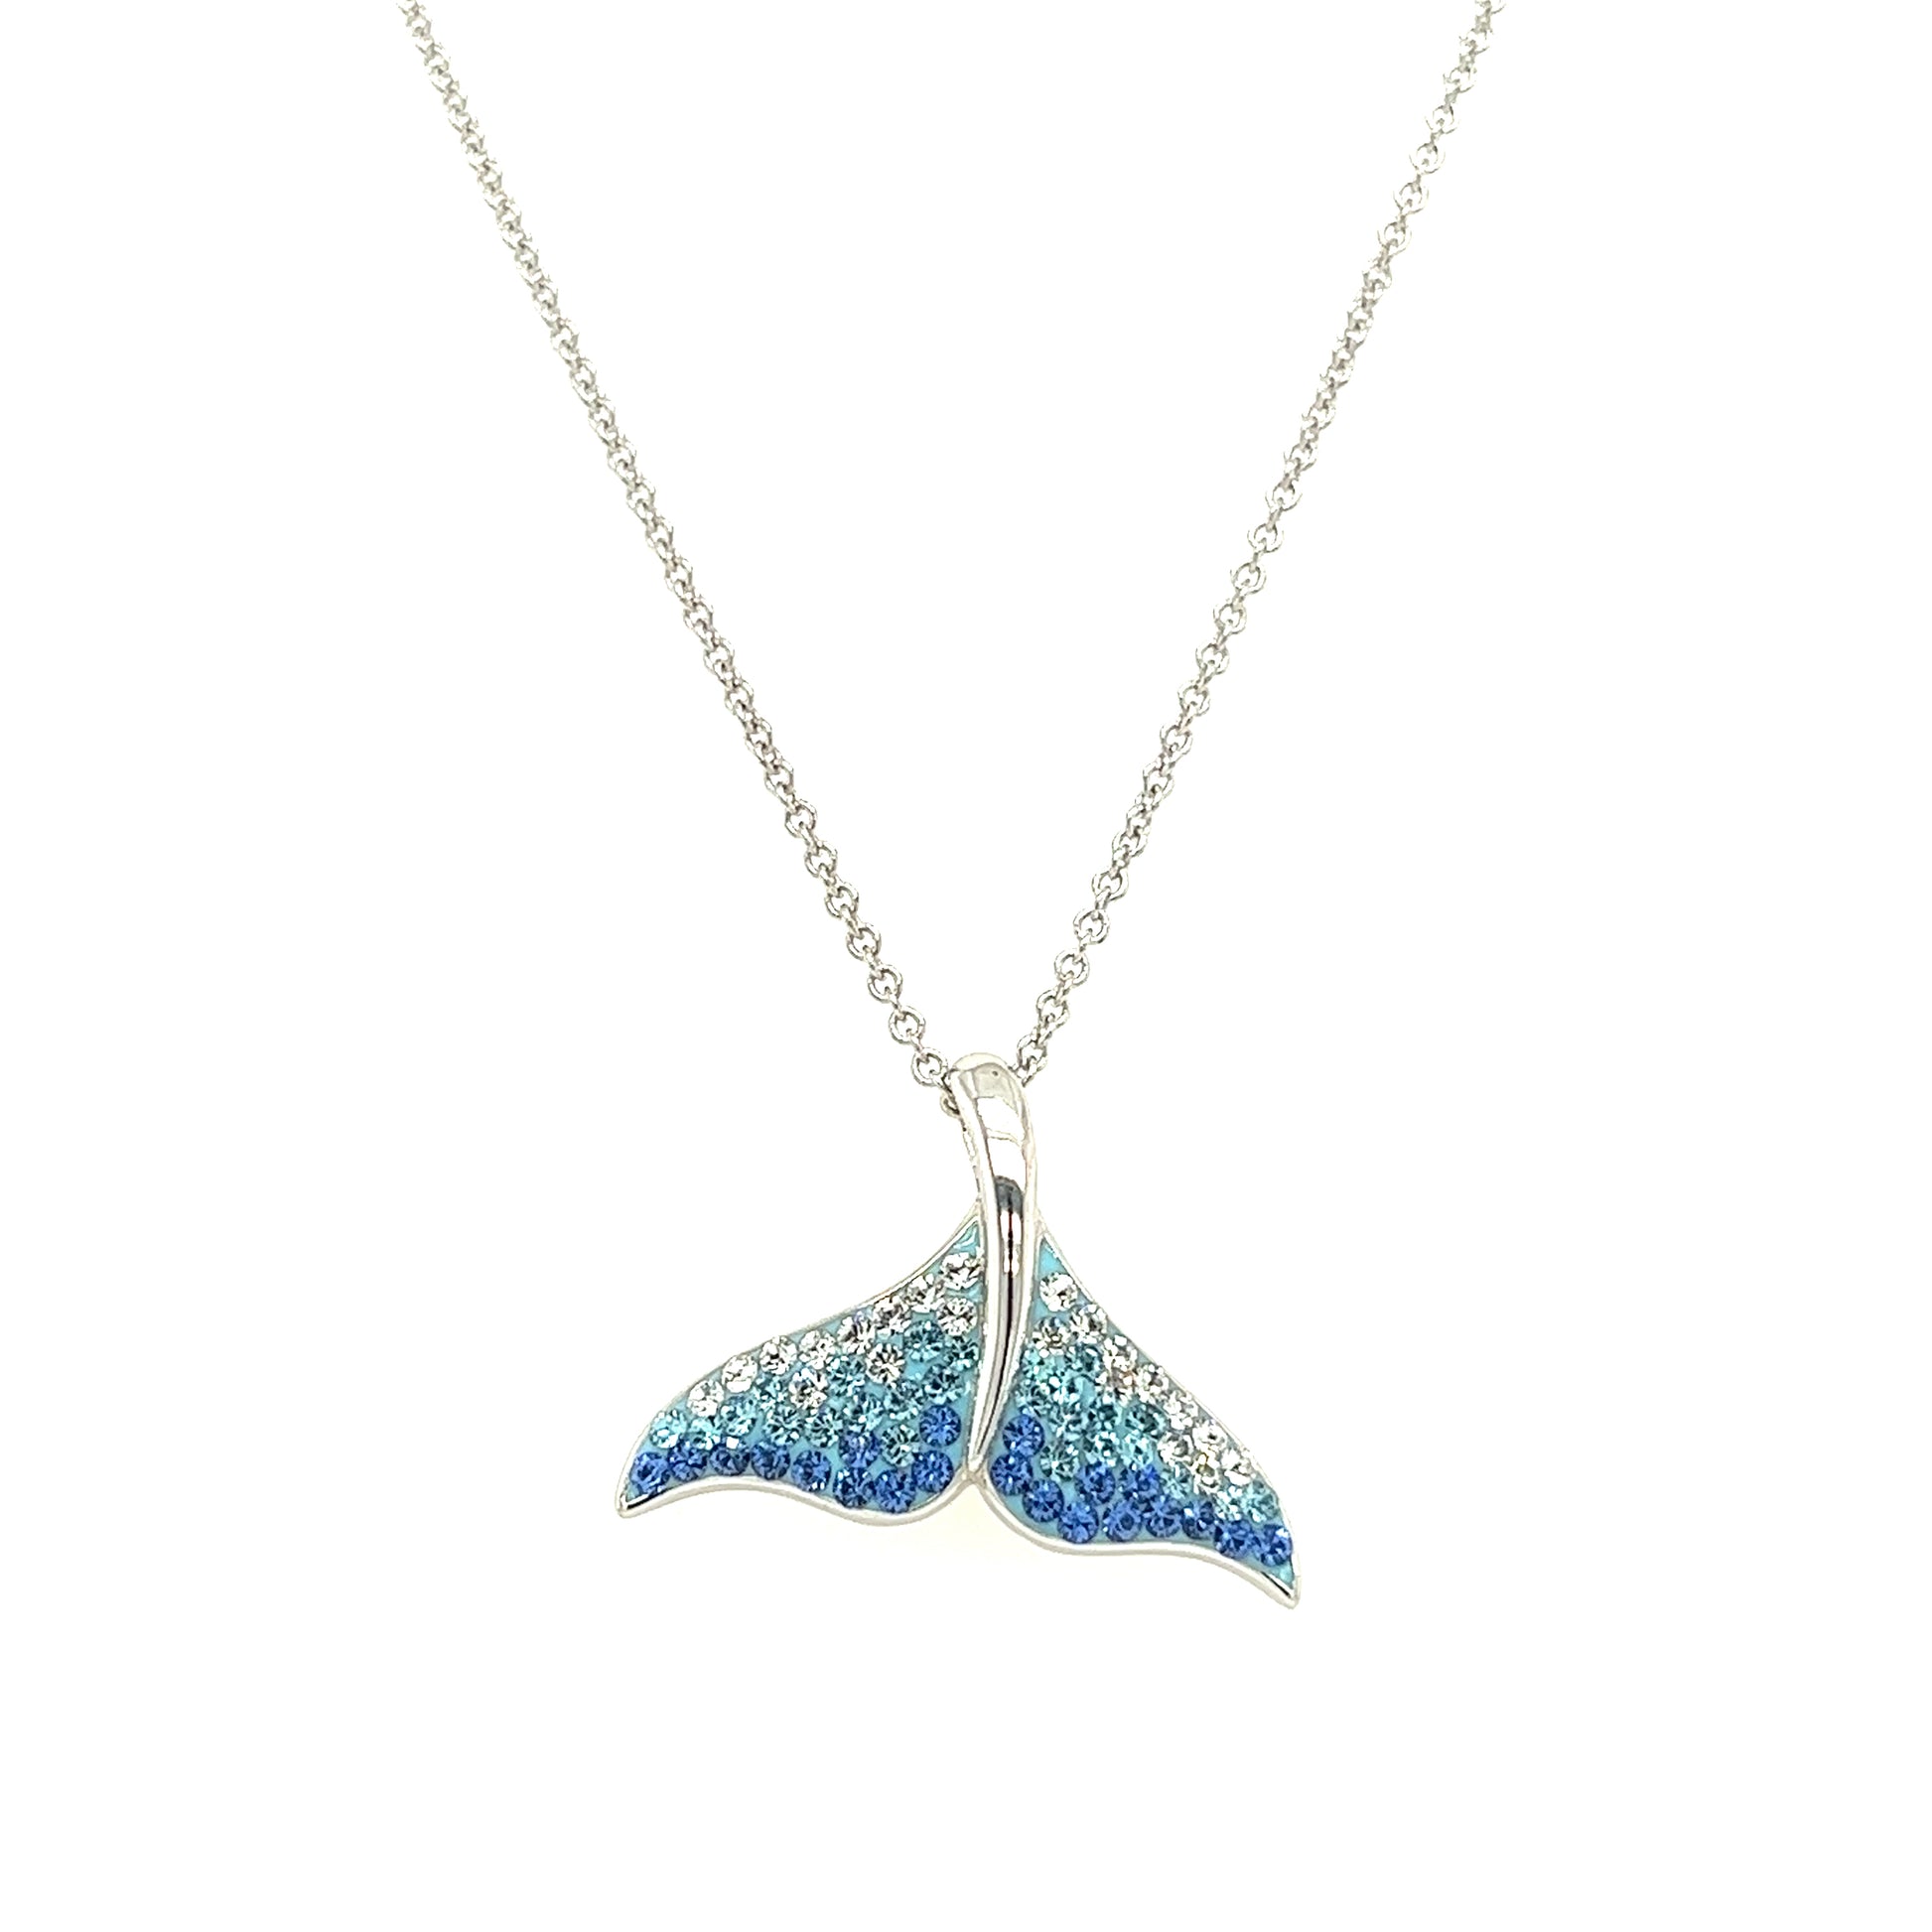 Whale Tail Necklace with White, Aqua and Blue Crystals in Sterling Silver  Front View